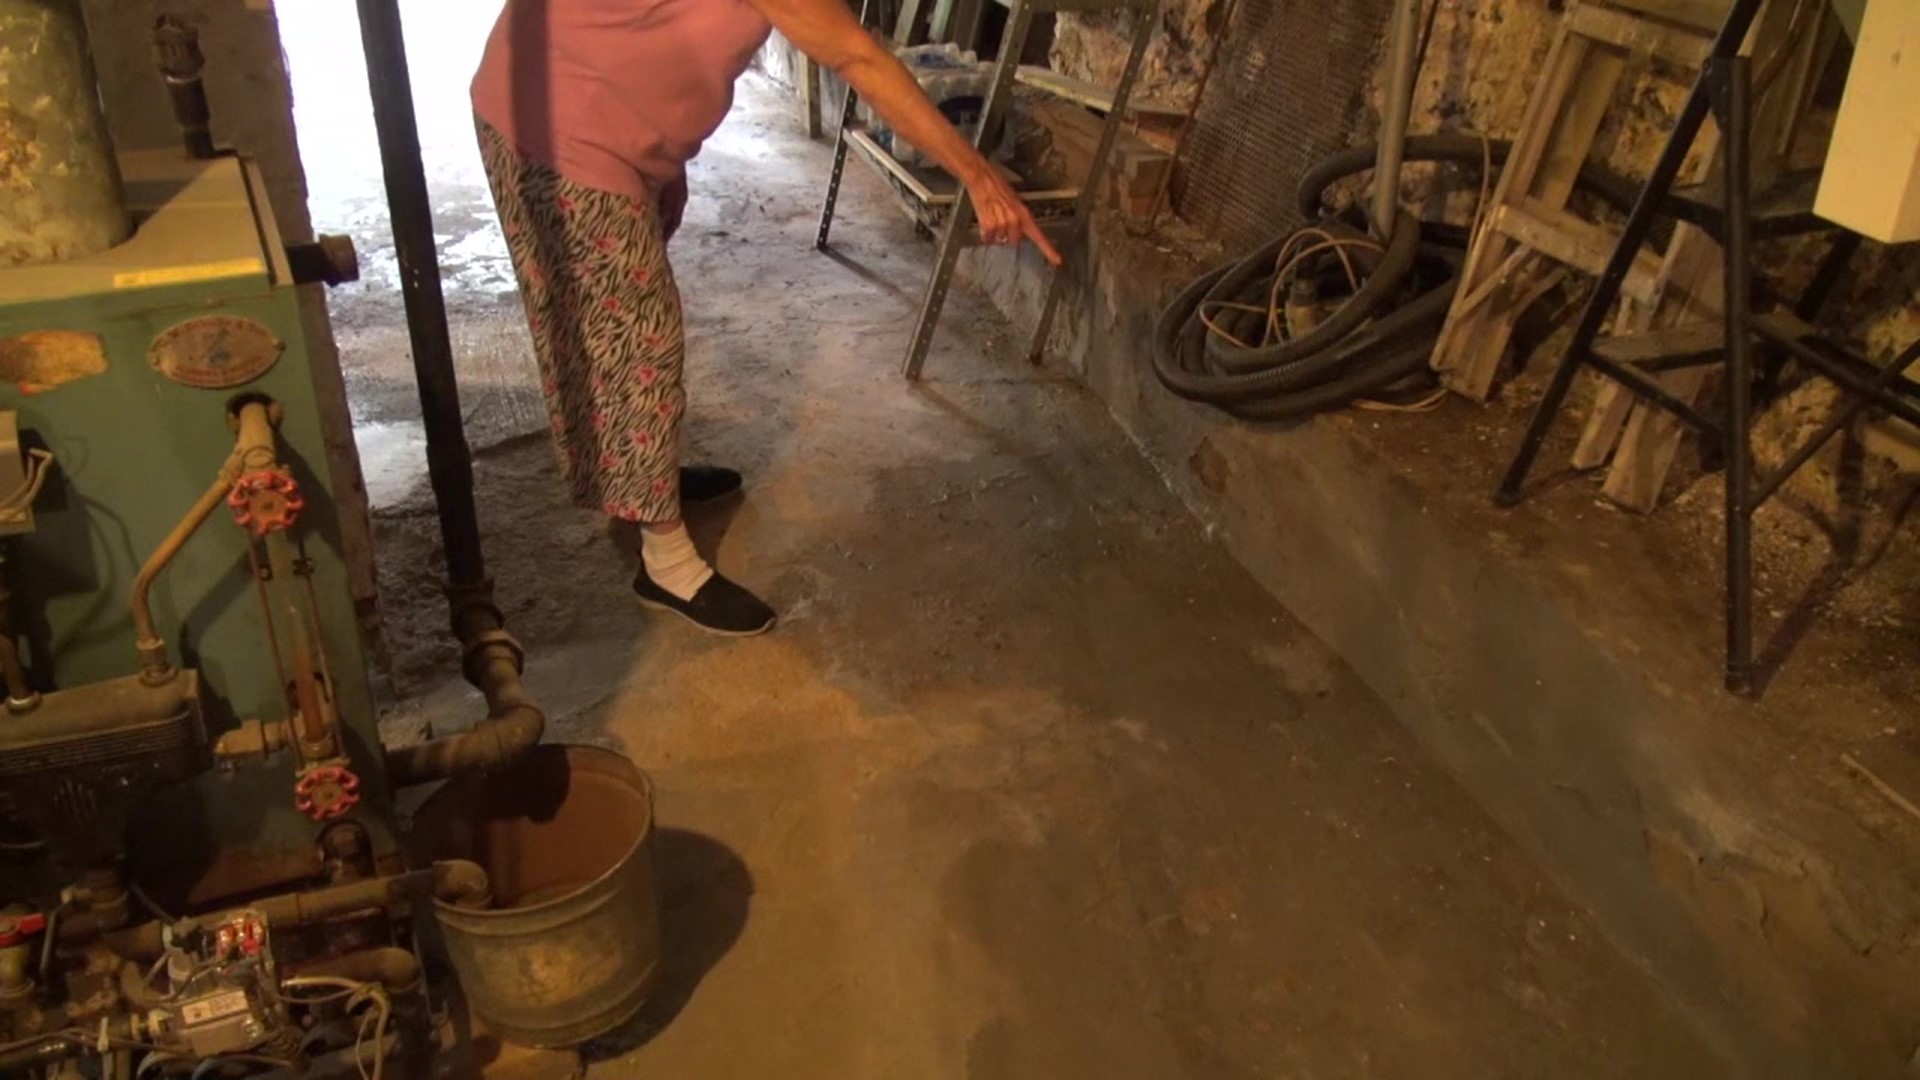 Basement waterproofing businesses all over the area are busy with calls this week from homeowners desperate to do something about their flooding fears.